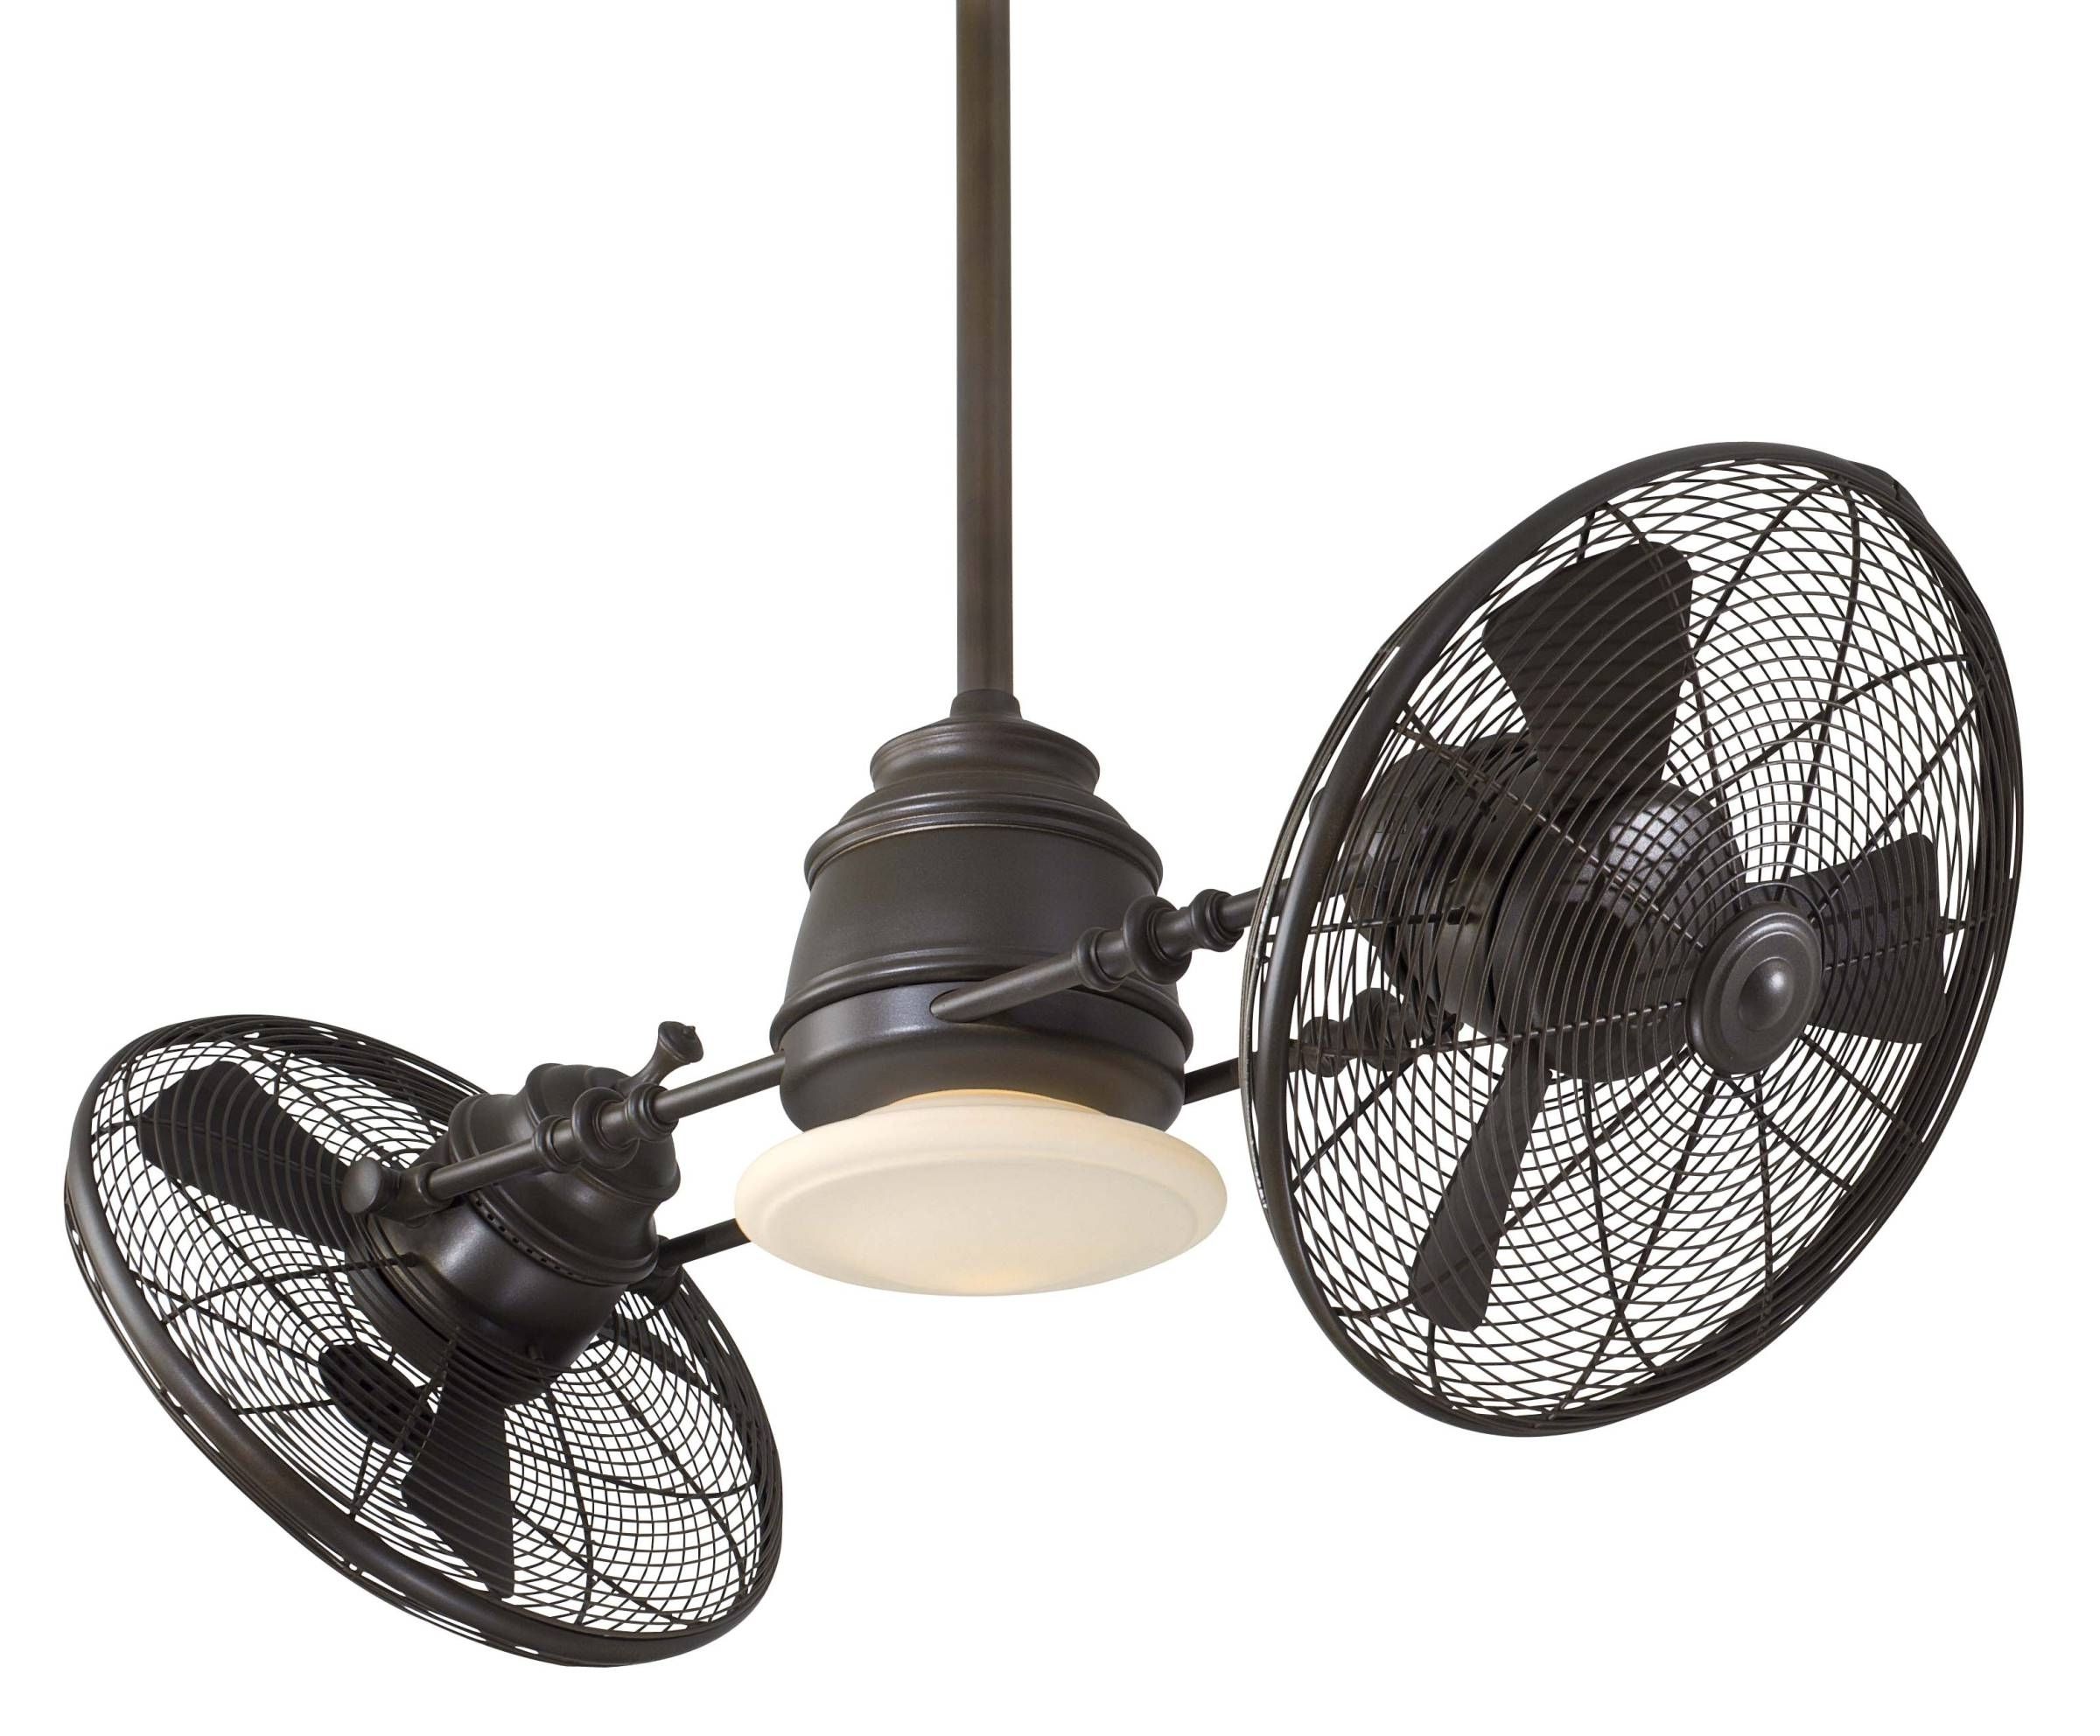 Most Recent Ceiling Fan Ideas Simple Old Fashioned Ceiling Fans Design Old Regarding Vintage Look Outdoor Ceiling Fans (View 18 of 20)